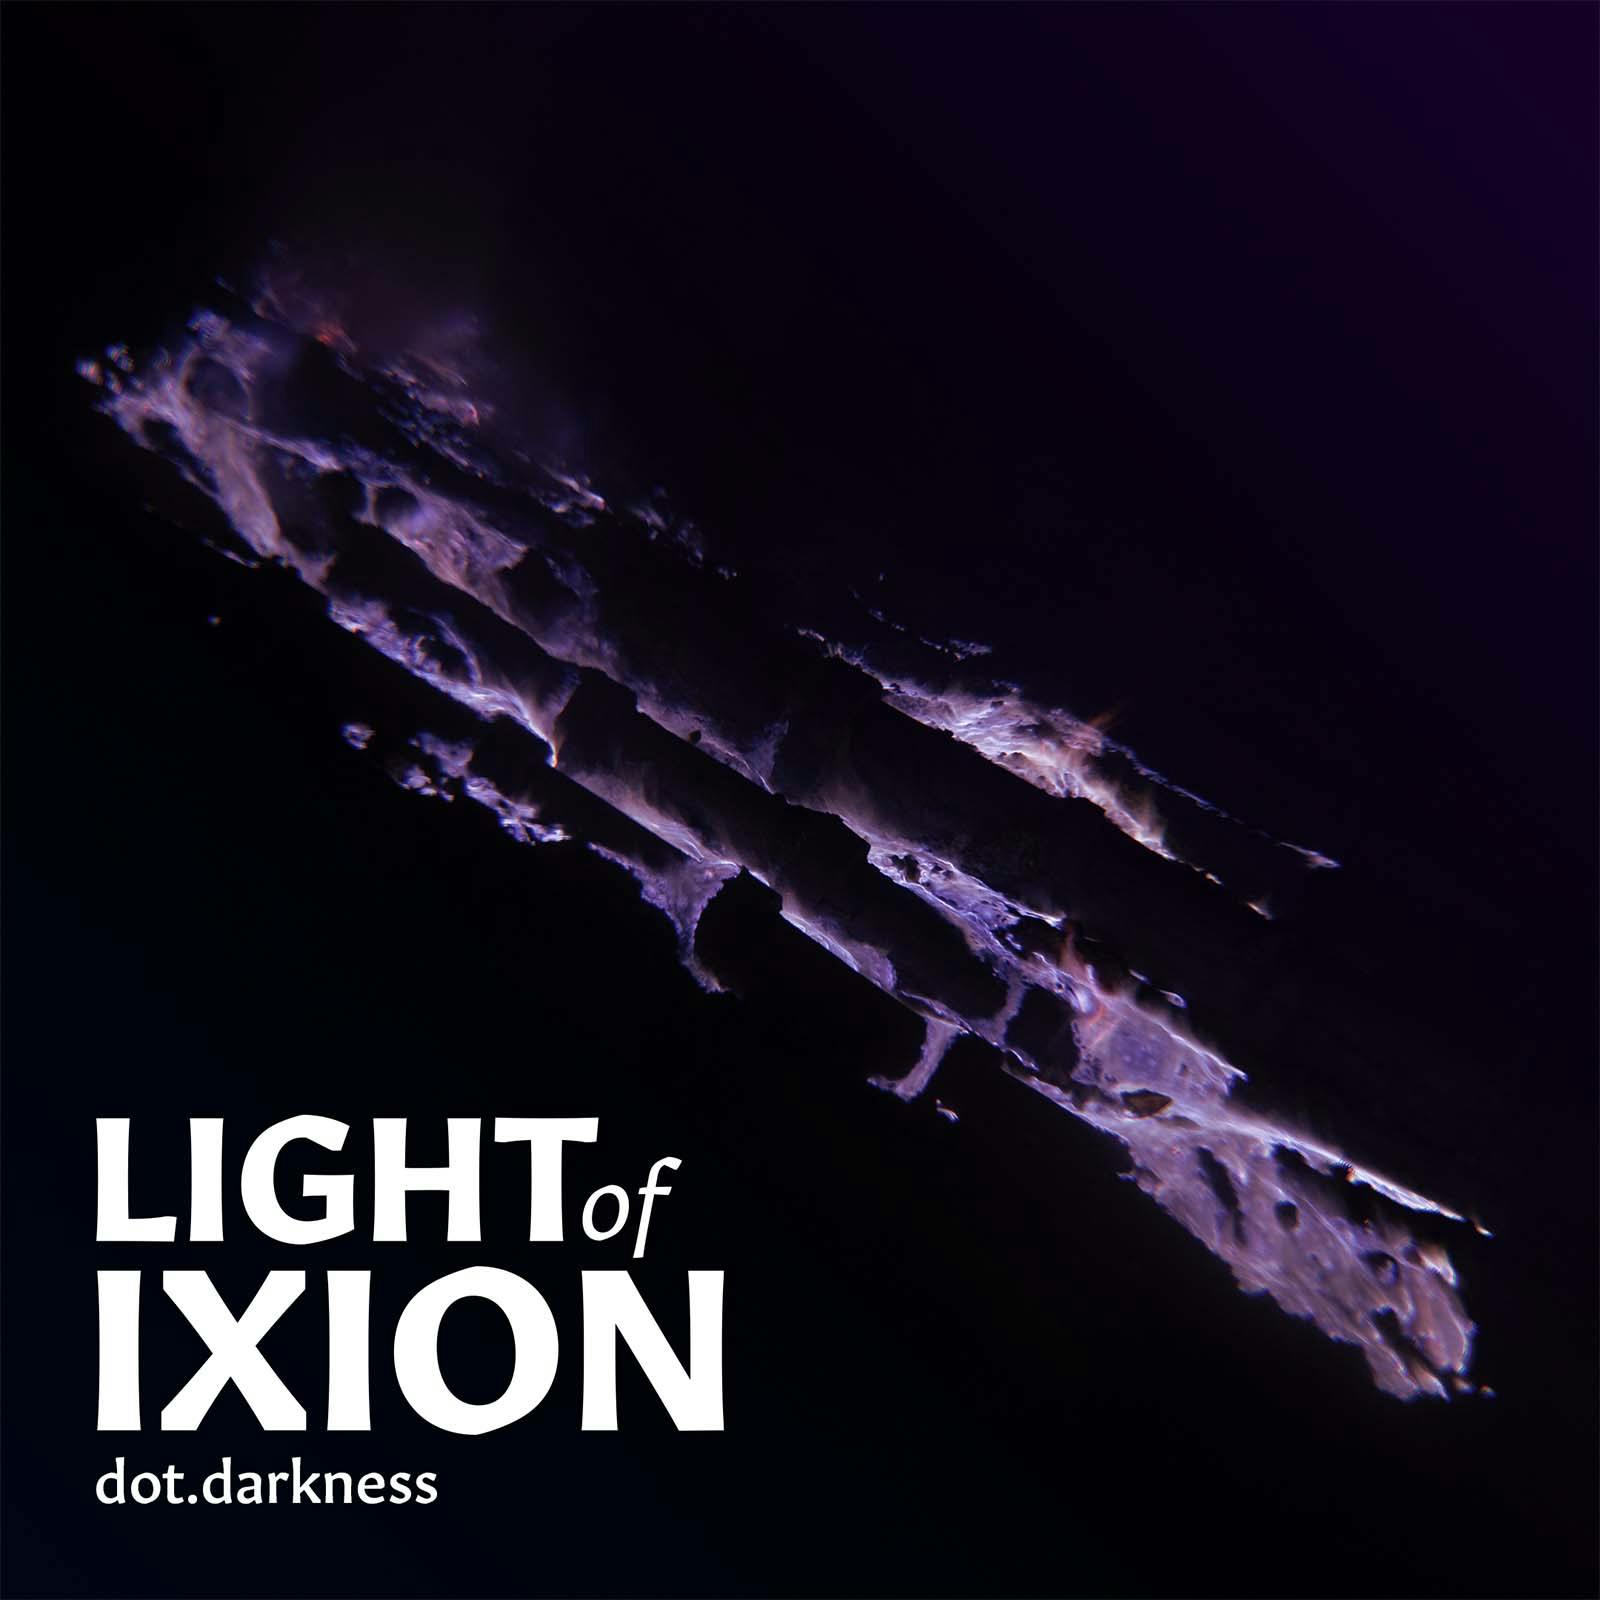 Artwork for Light of Ixion by dot.darkness. The opening of a what seems to be a crater or volcano with purple-hued flames emanating from within. The text reads "Light of Ixion by dot dot darkness".